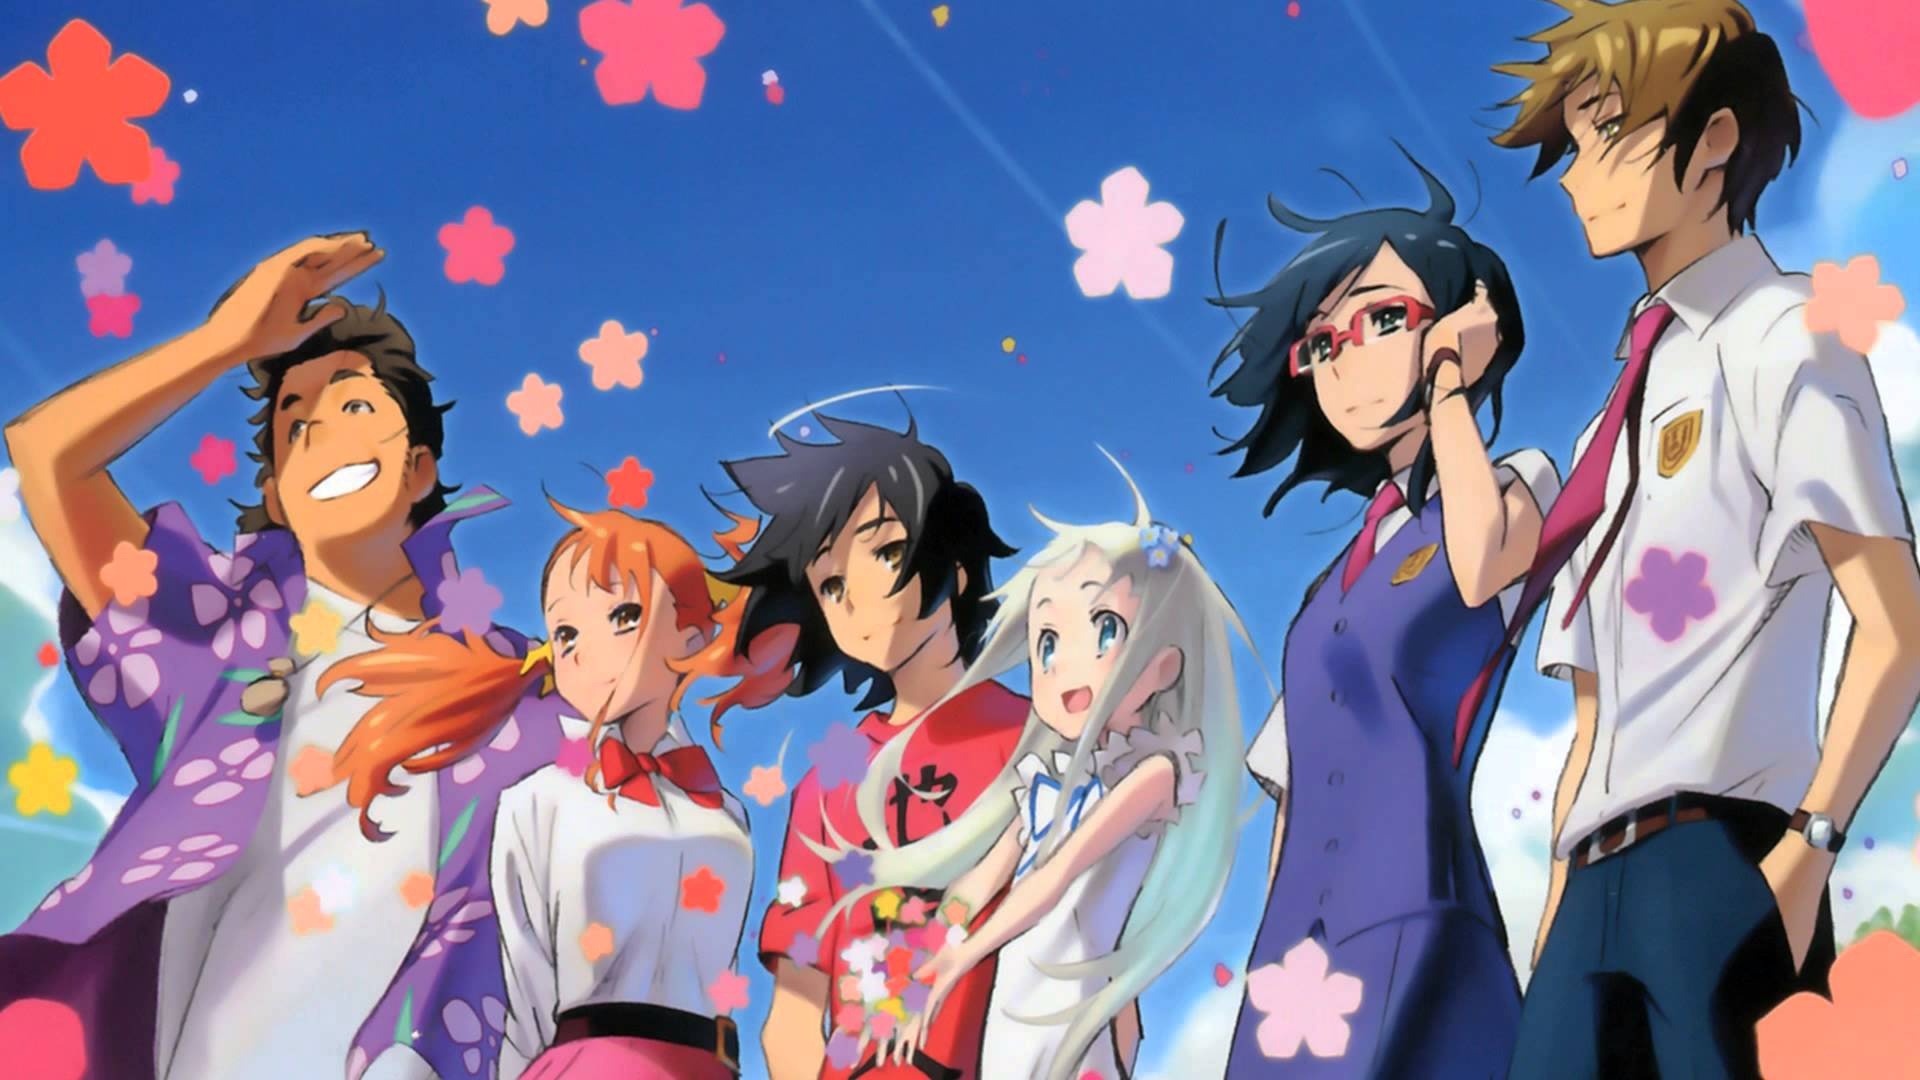 Anohana: The Flower We Saw That Day, Wallpaper collection, Anime series, Emotional storyline, 1920x1080 Full HD Desktop